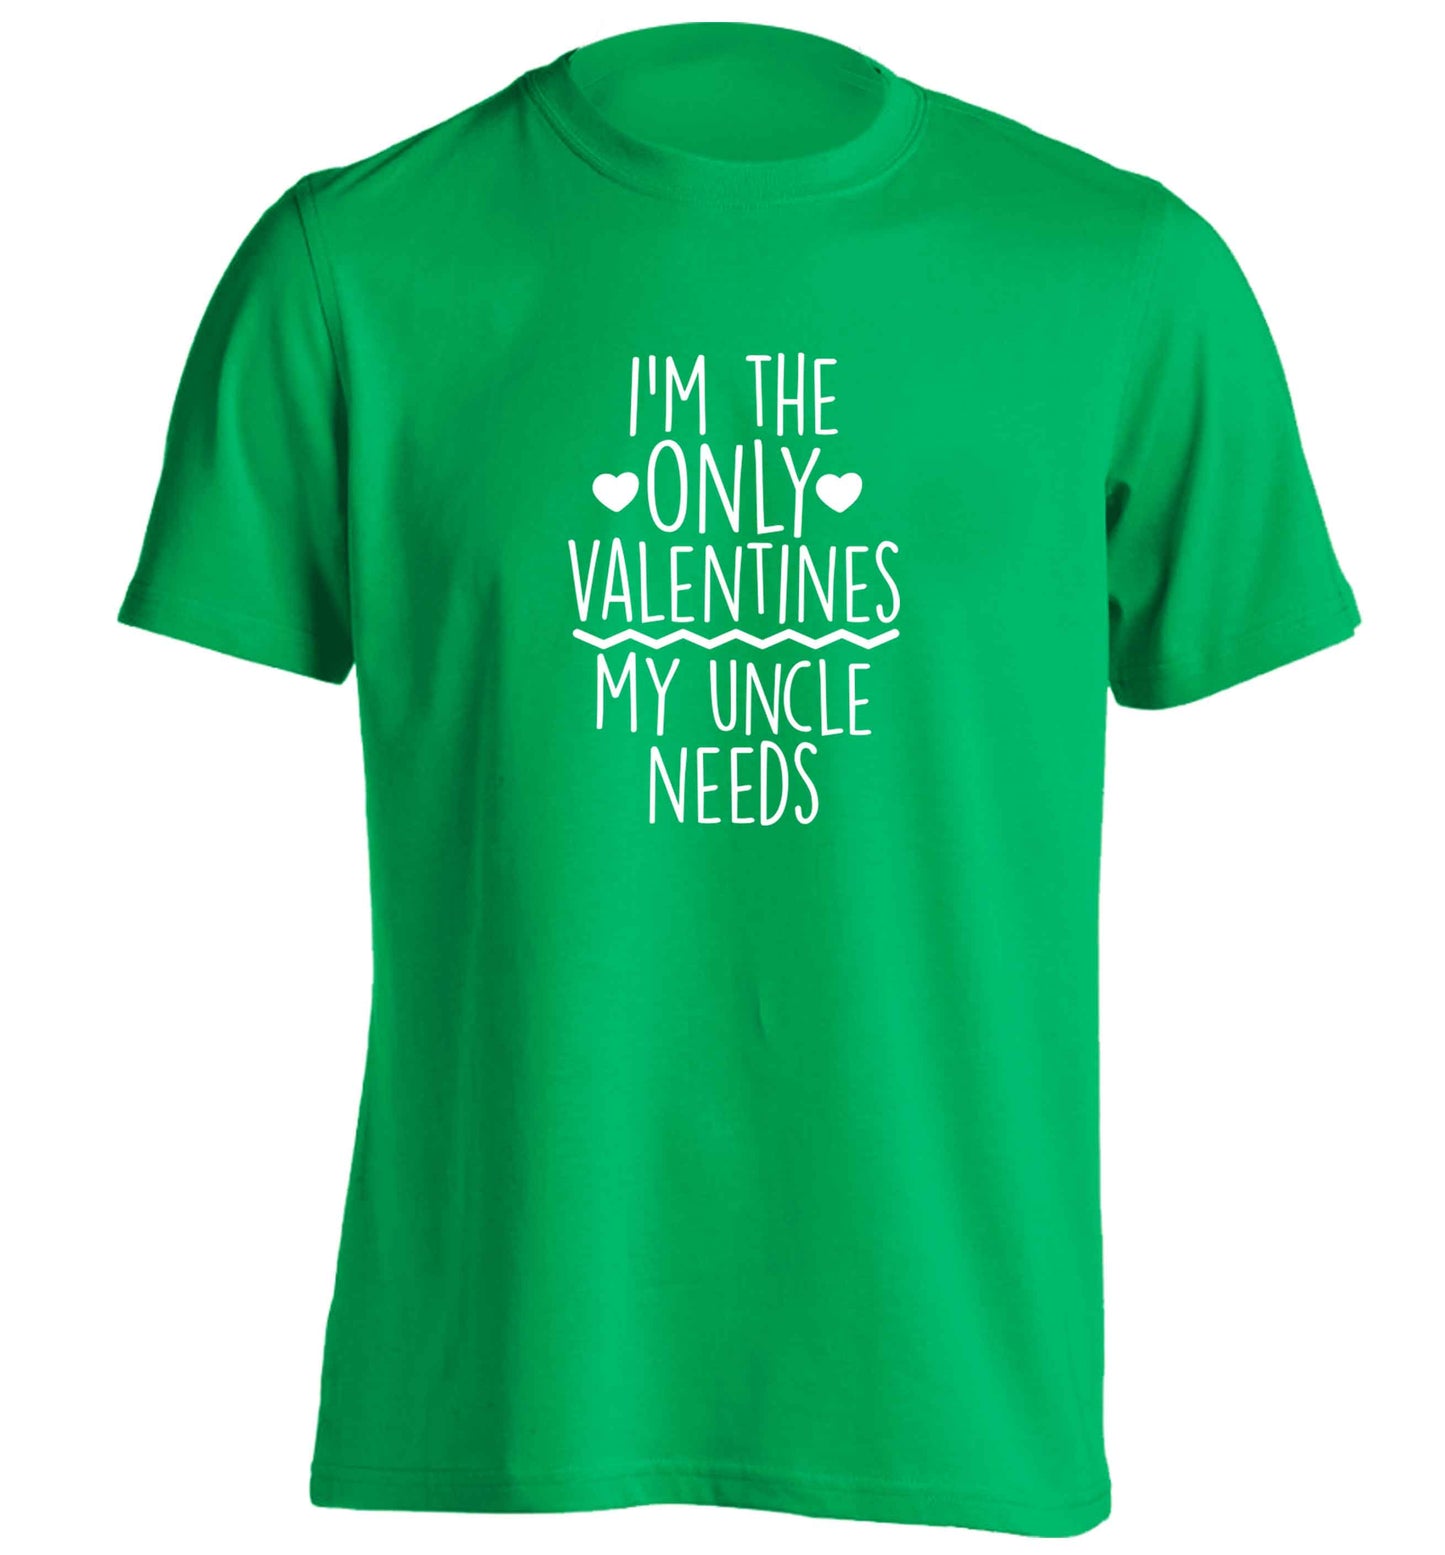 I'm the only valentines my uncle needs adults unisex green Tshirt 2XL